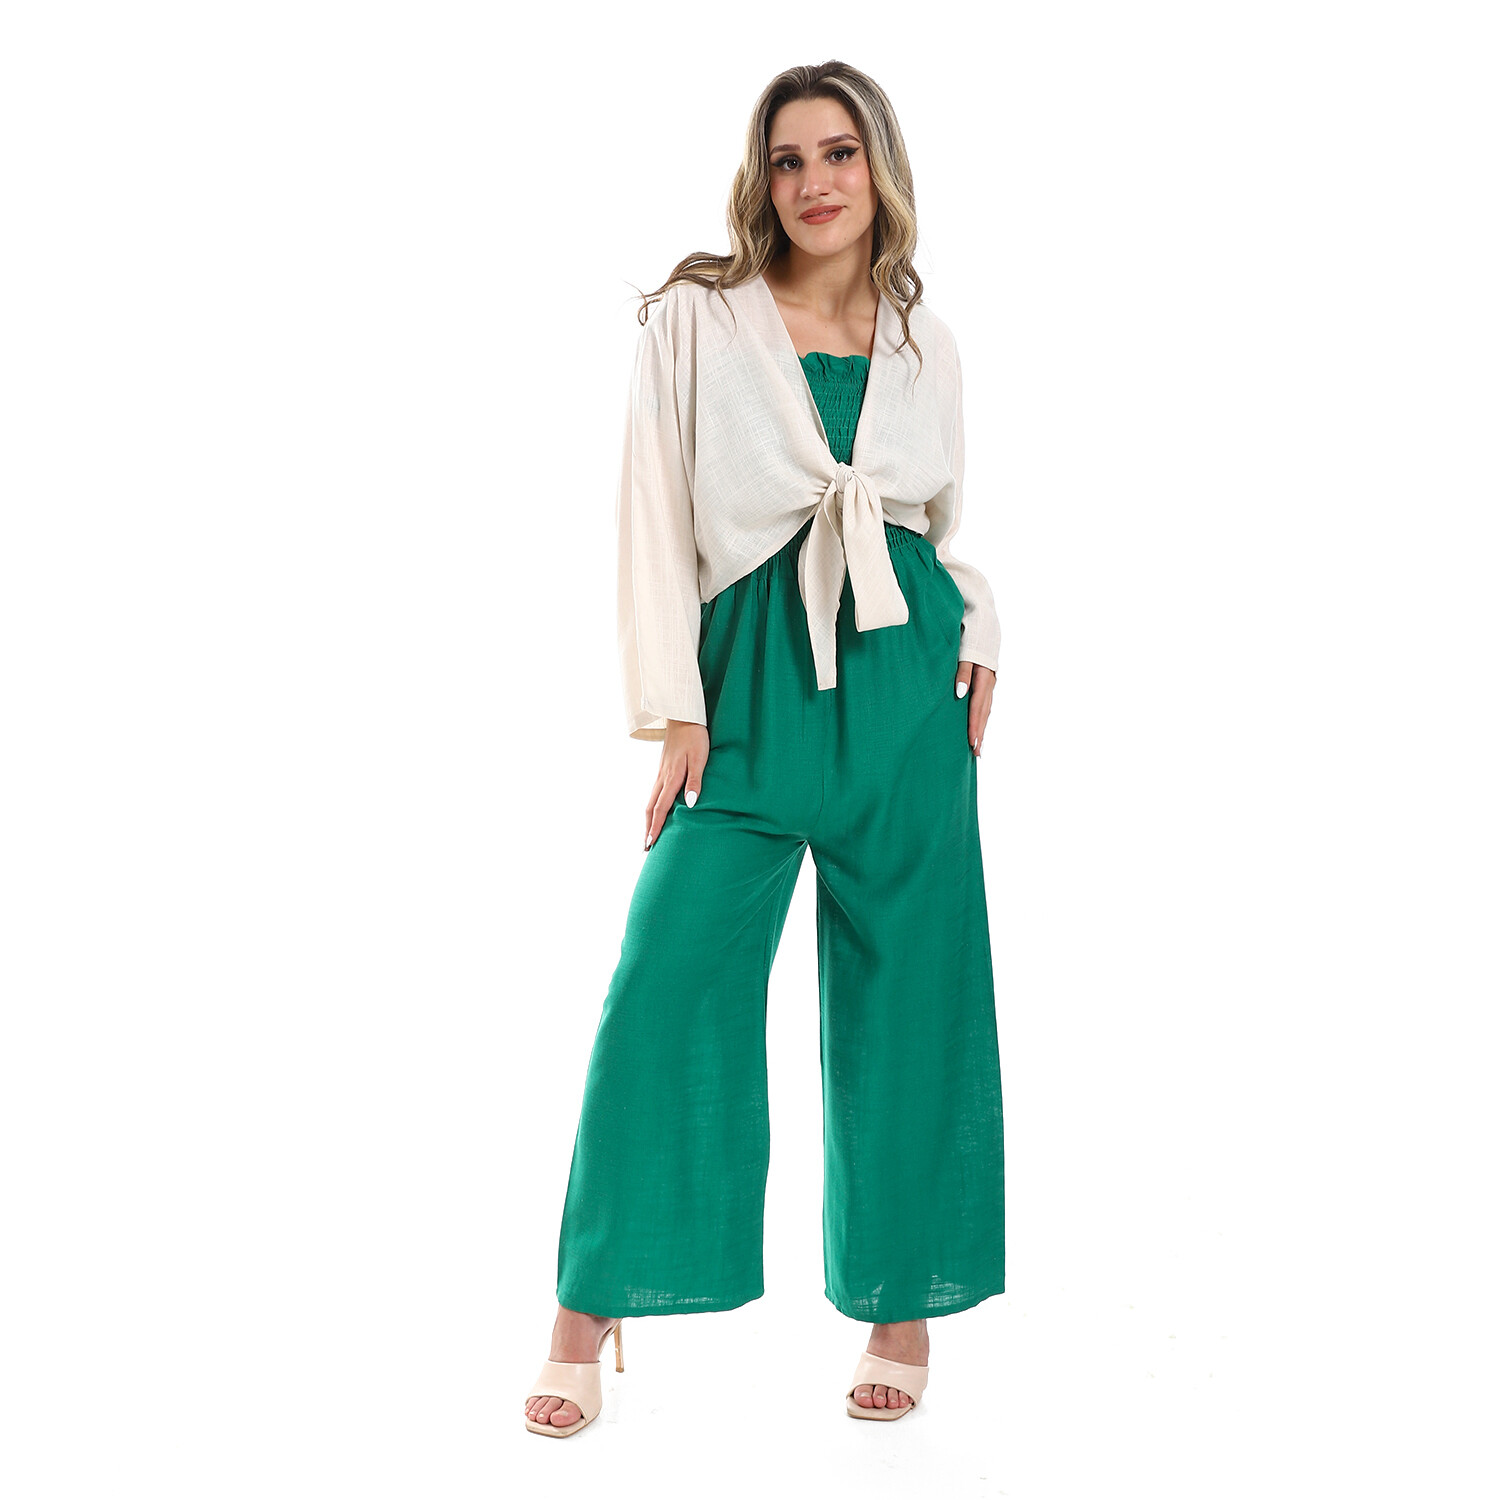 Tie Strap Shirred Bust Jumpsuit With Off-White Cardigan - Green 2988